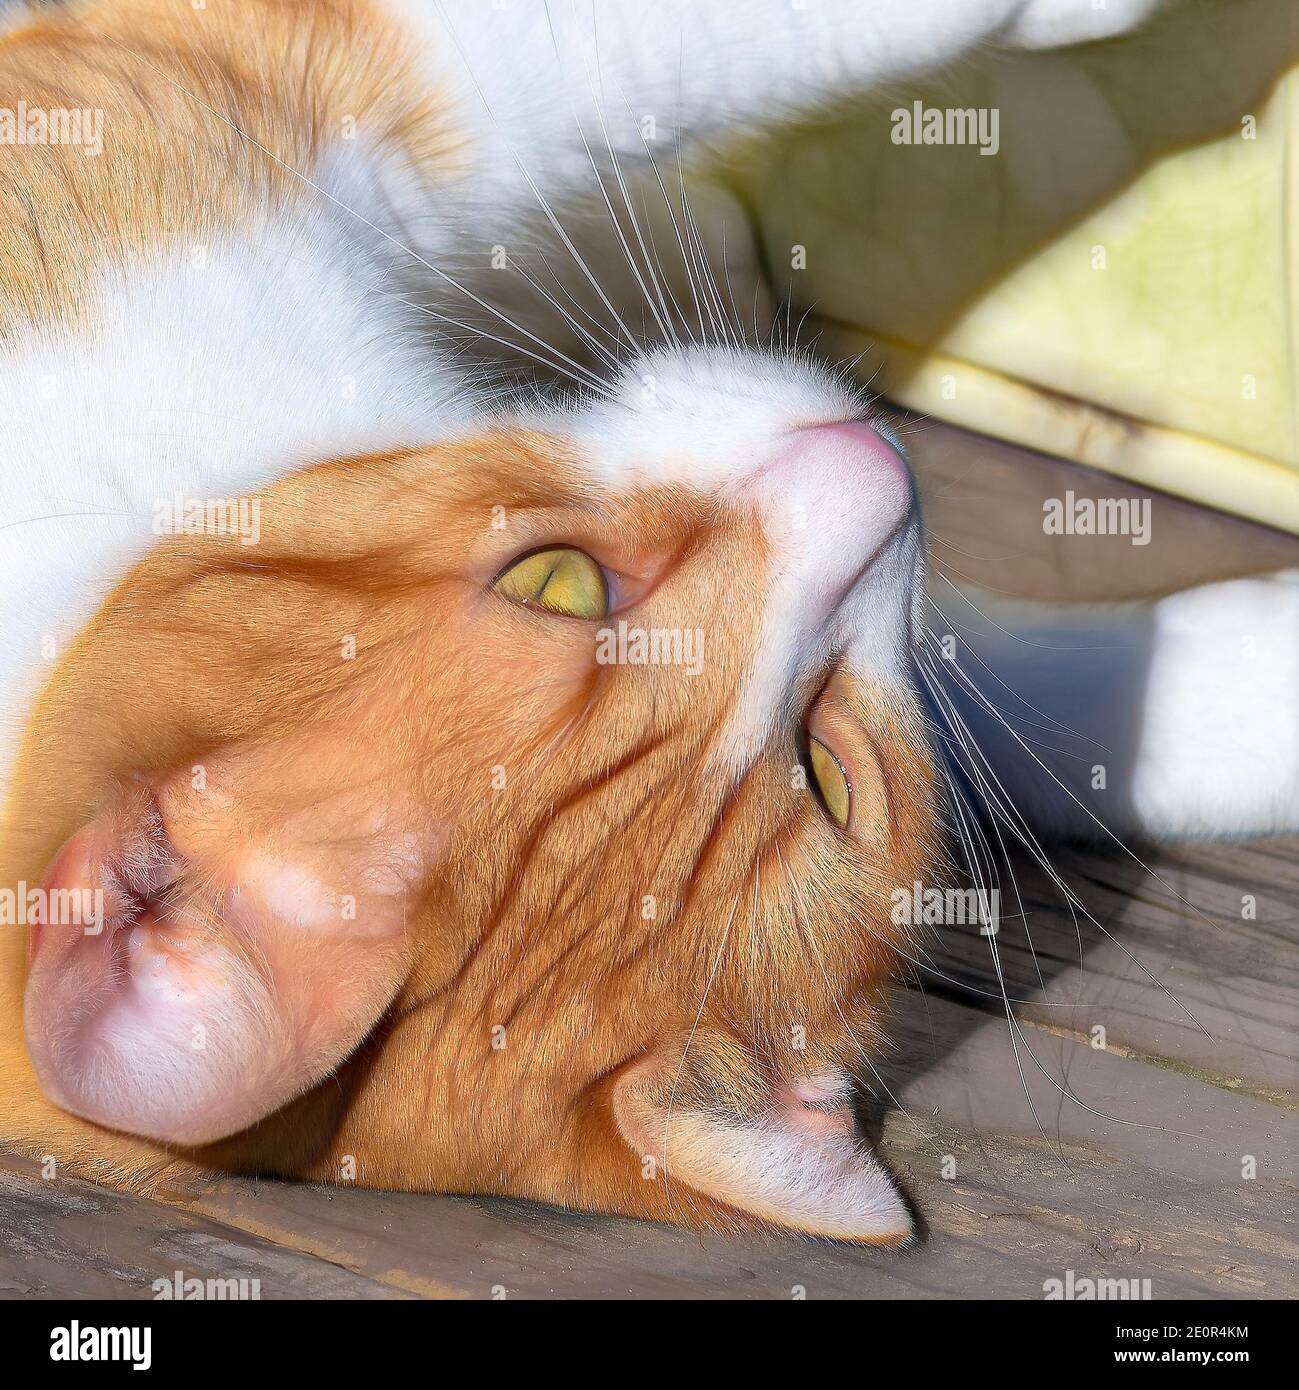 Extreme close up of cats face, eyes, whiskers Stock Photo